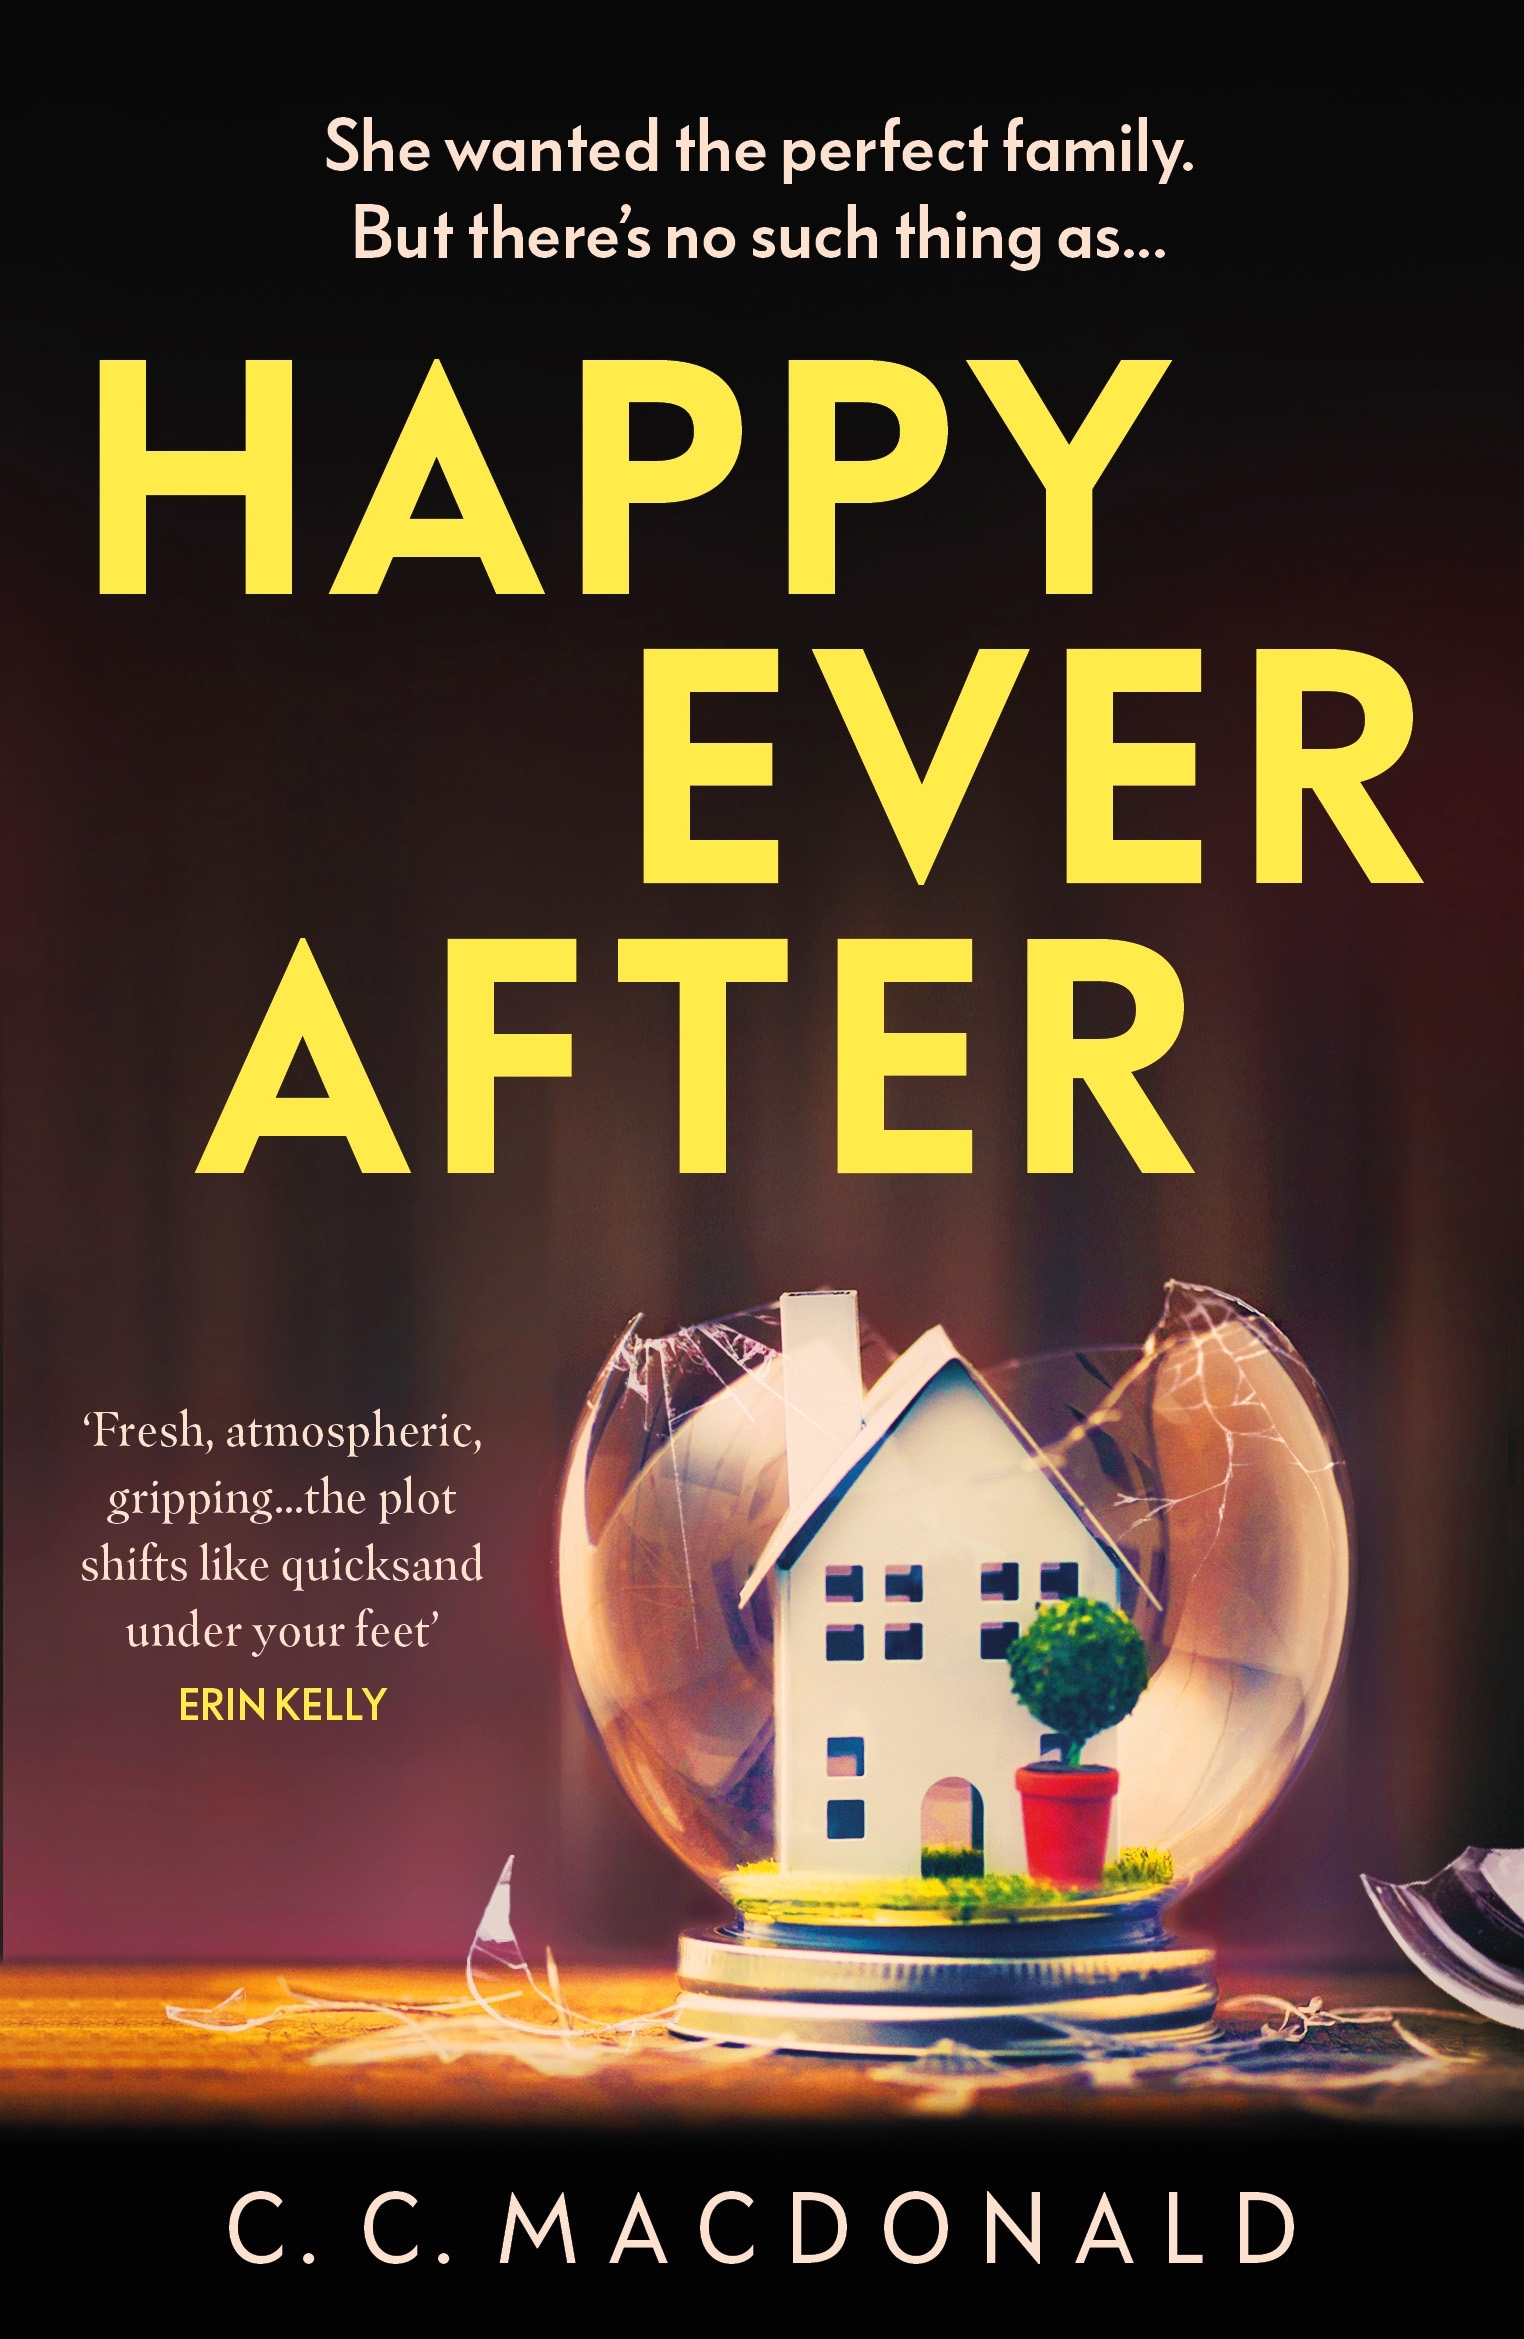 Happy Ever After by C. C. MacDonald - Penguin Books New Zealand